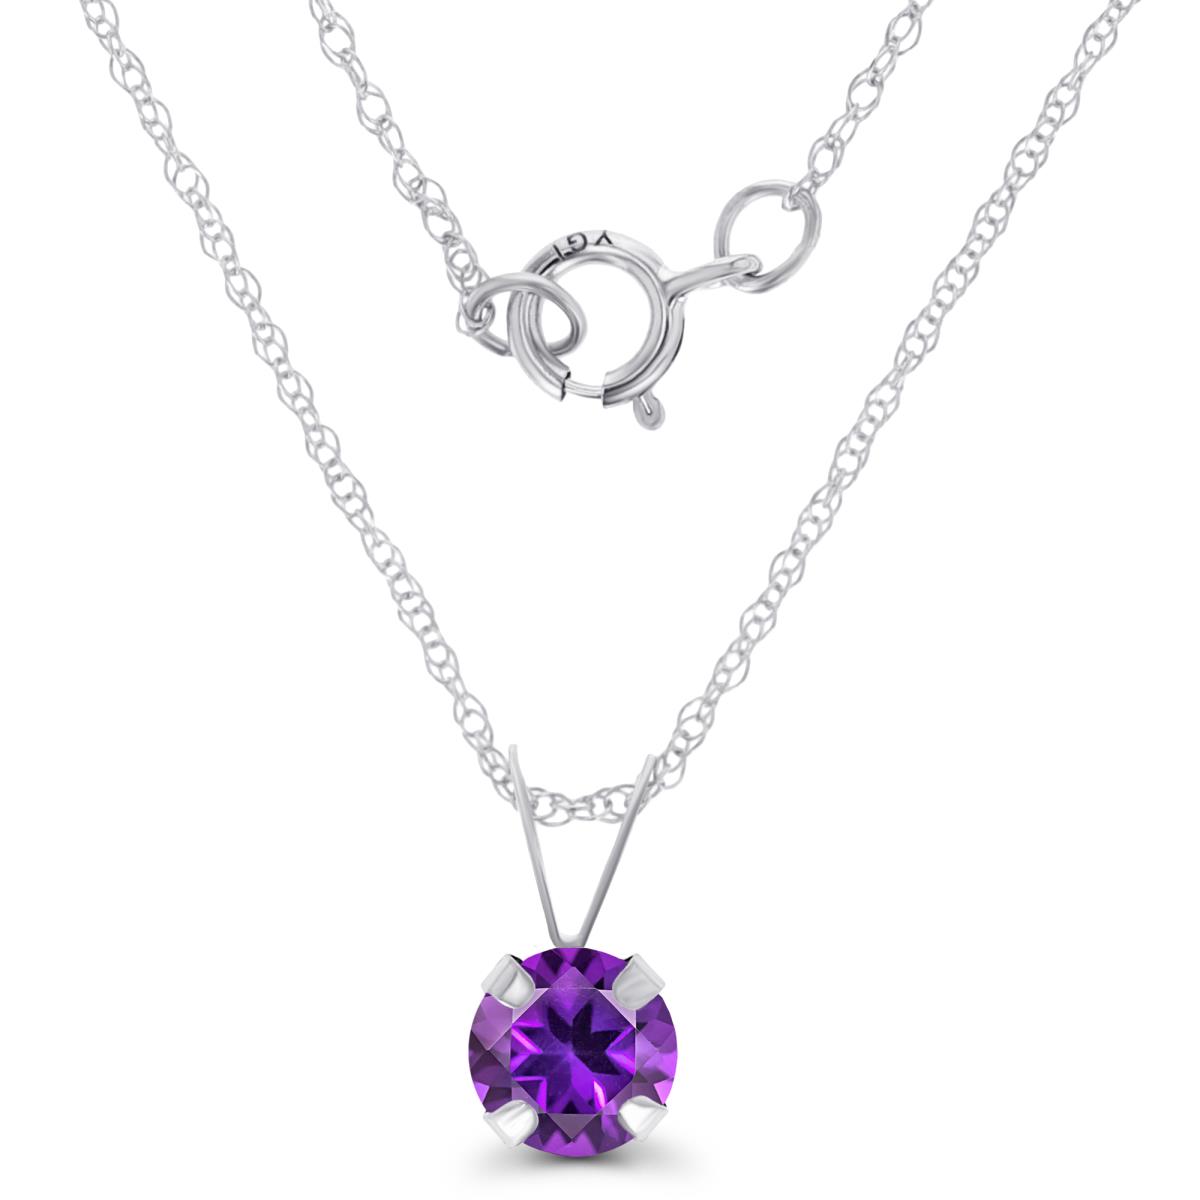 14K White Gold 5mm Round Amethyst 18" Rope Chain Necklace